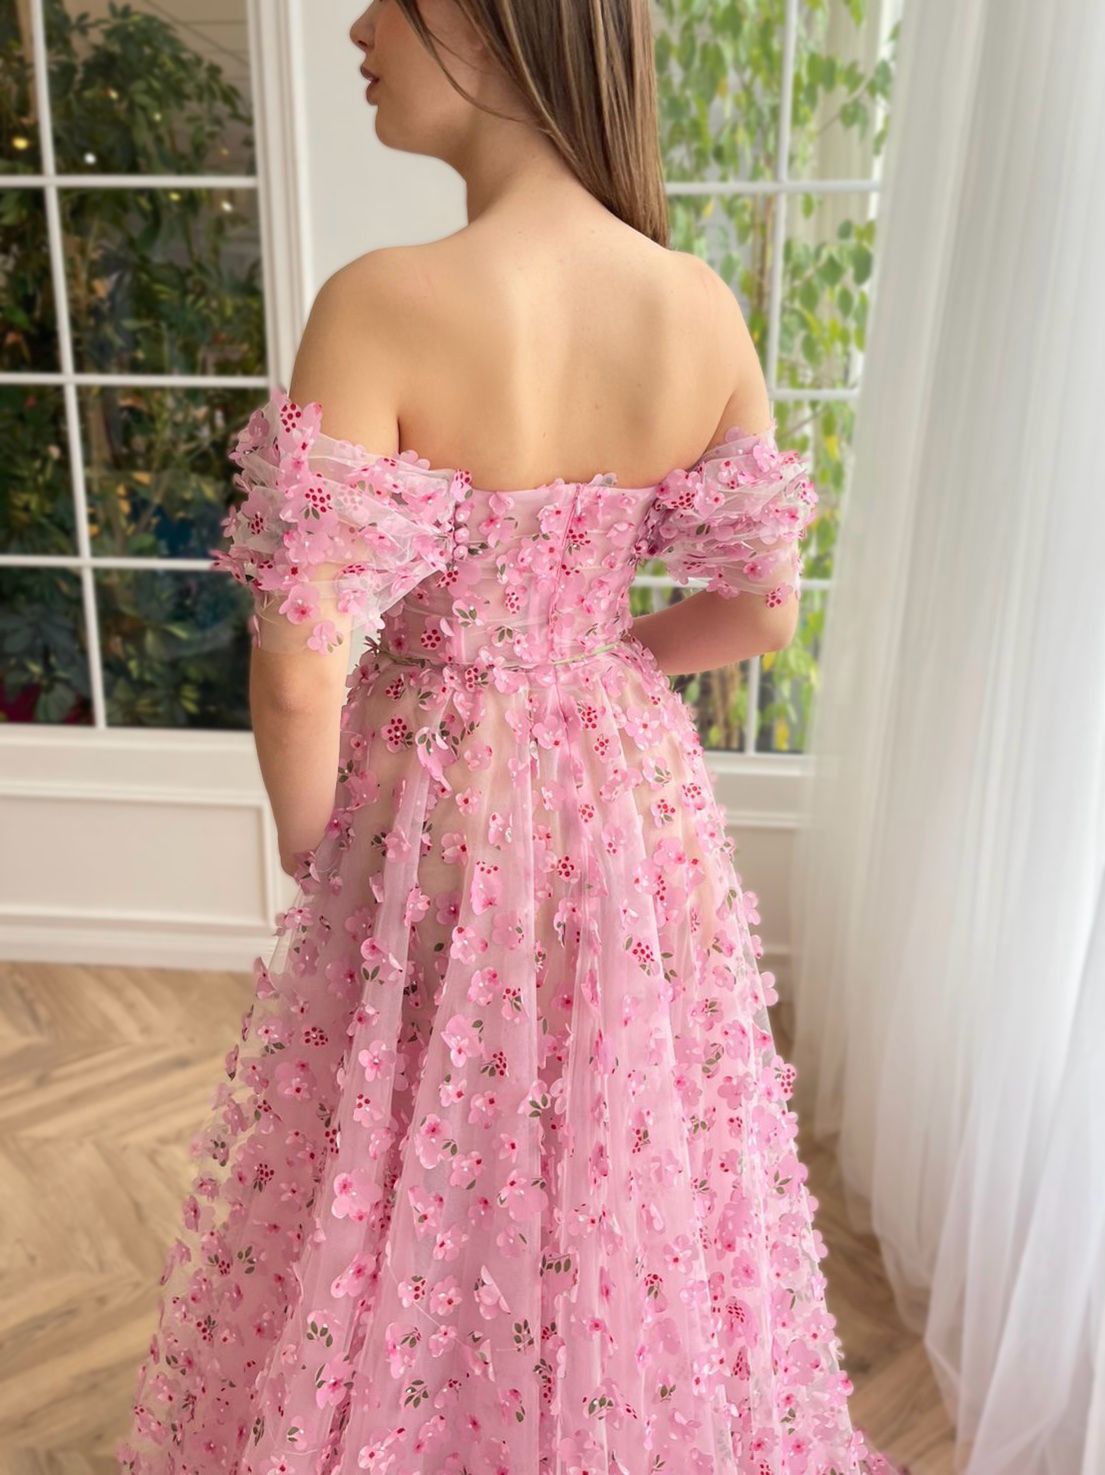 Pink A-Line dress with straps and embroidery